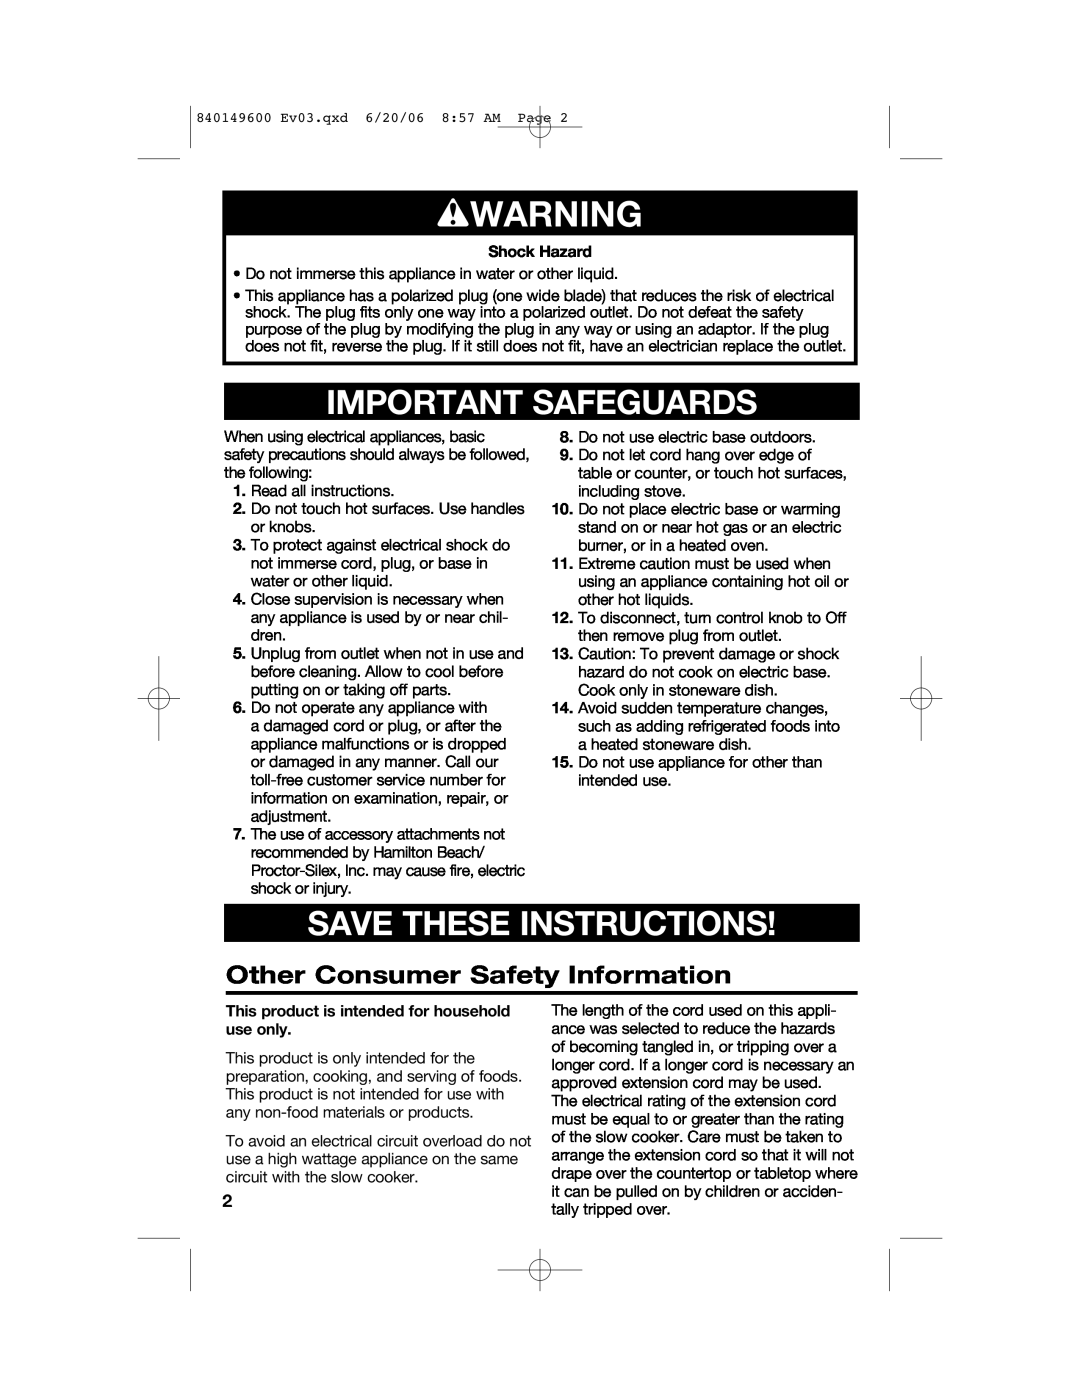 Hamilton Beach 840149600 manual wWARNING, Important Safeguards, Save These Instructions, Other Consumer Safety Information 